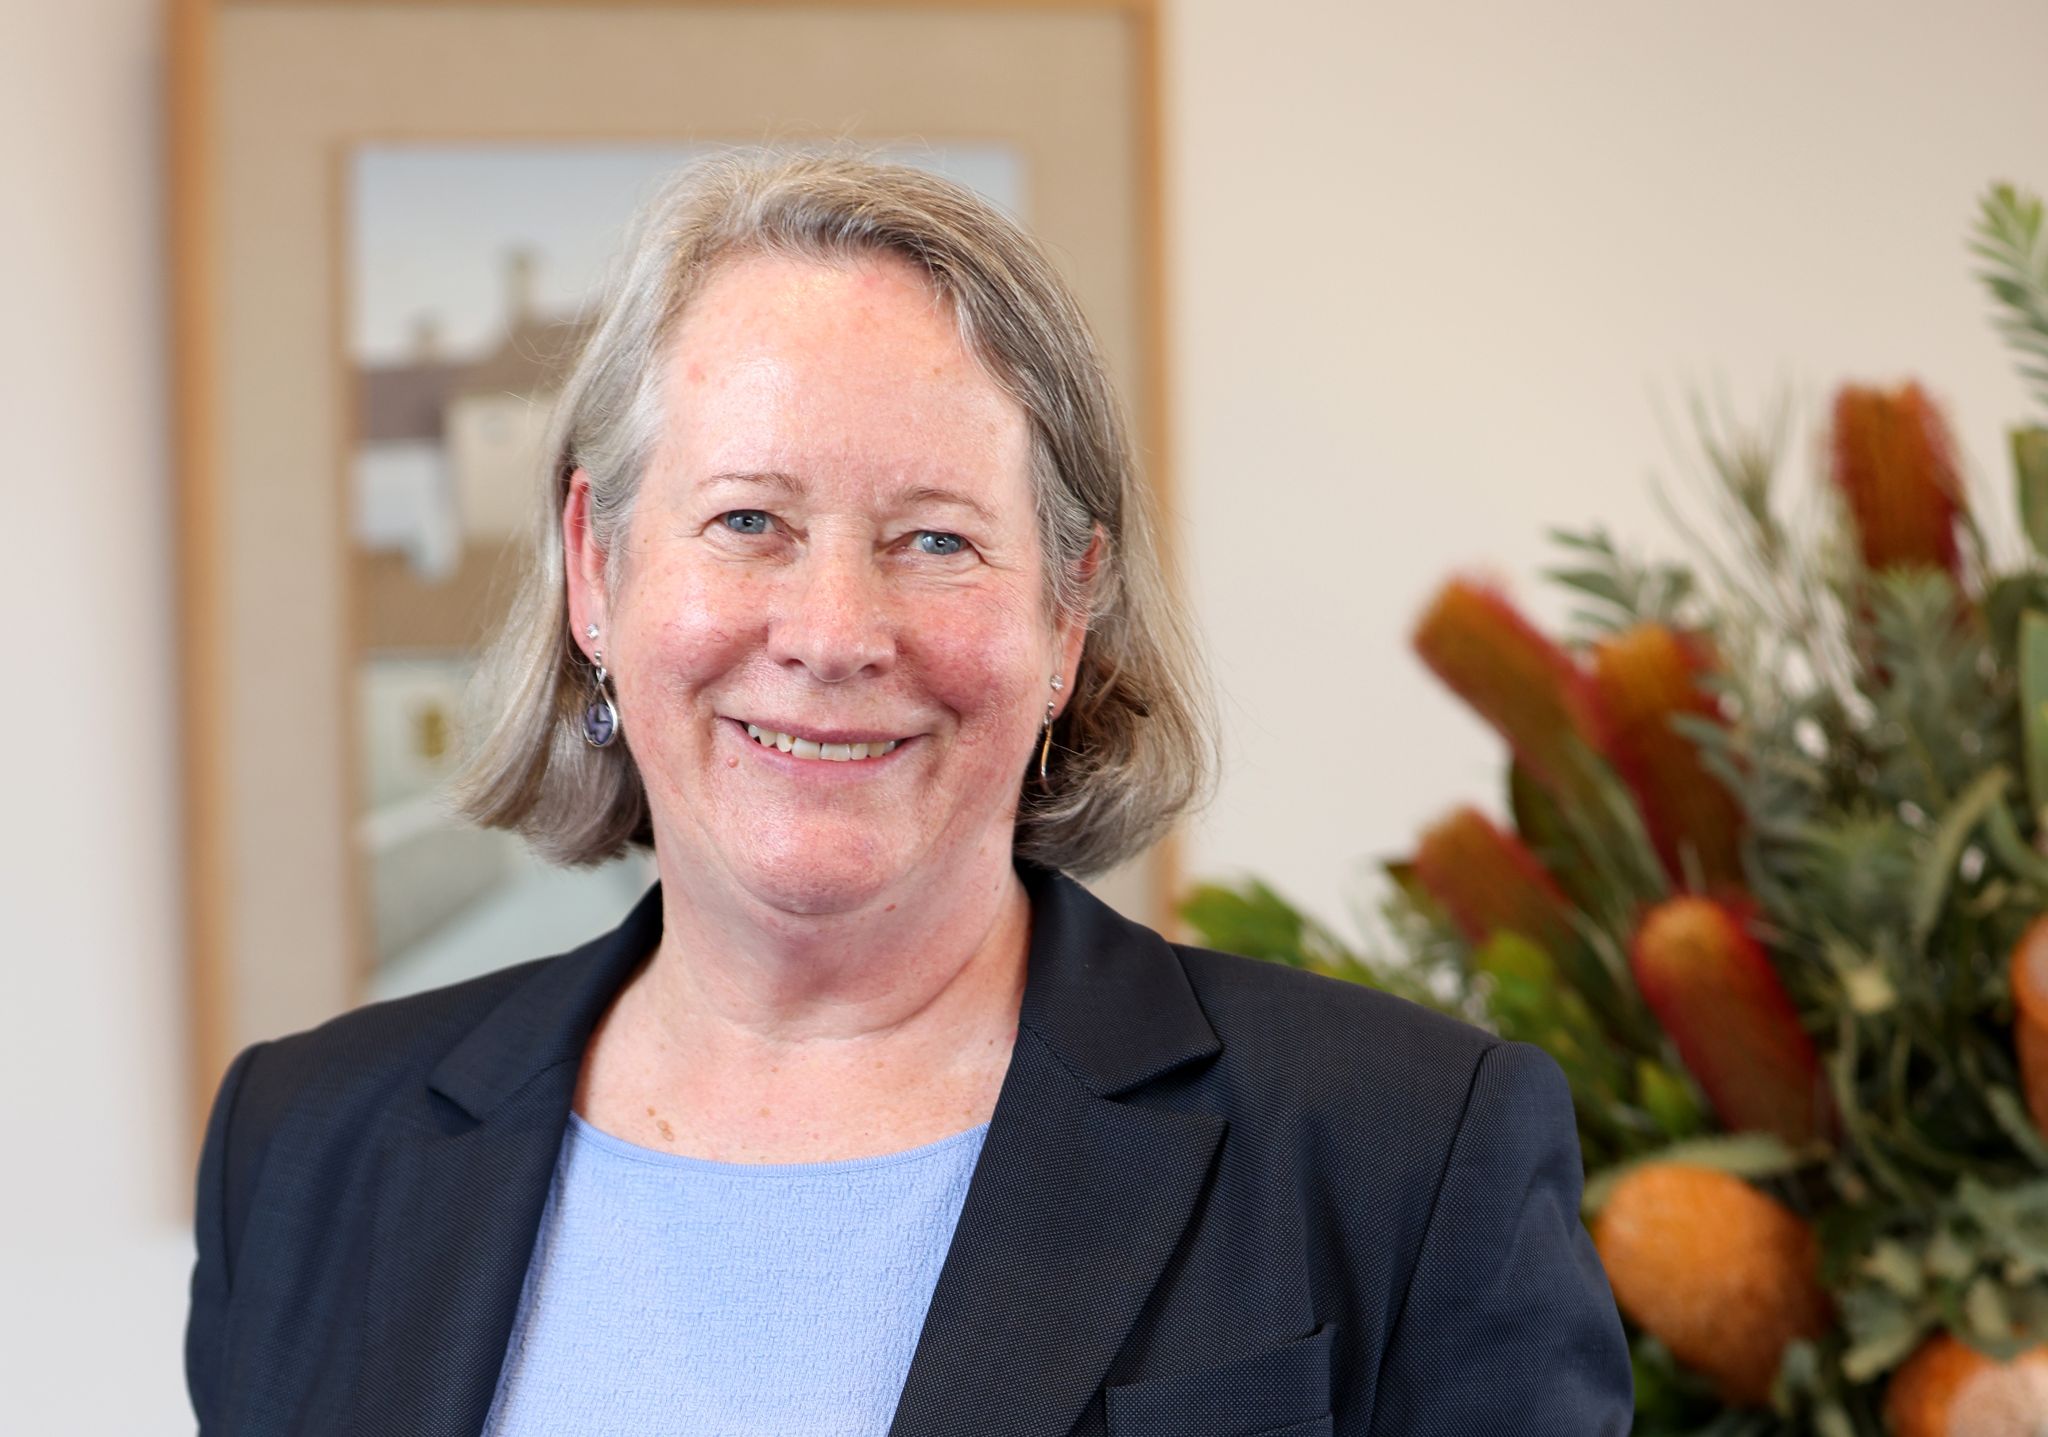 Justice Debra Mortimer Appointed As First Female Chief Justice Of The Federal Court Of Australia 9361